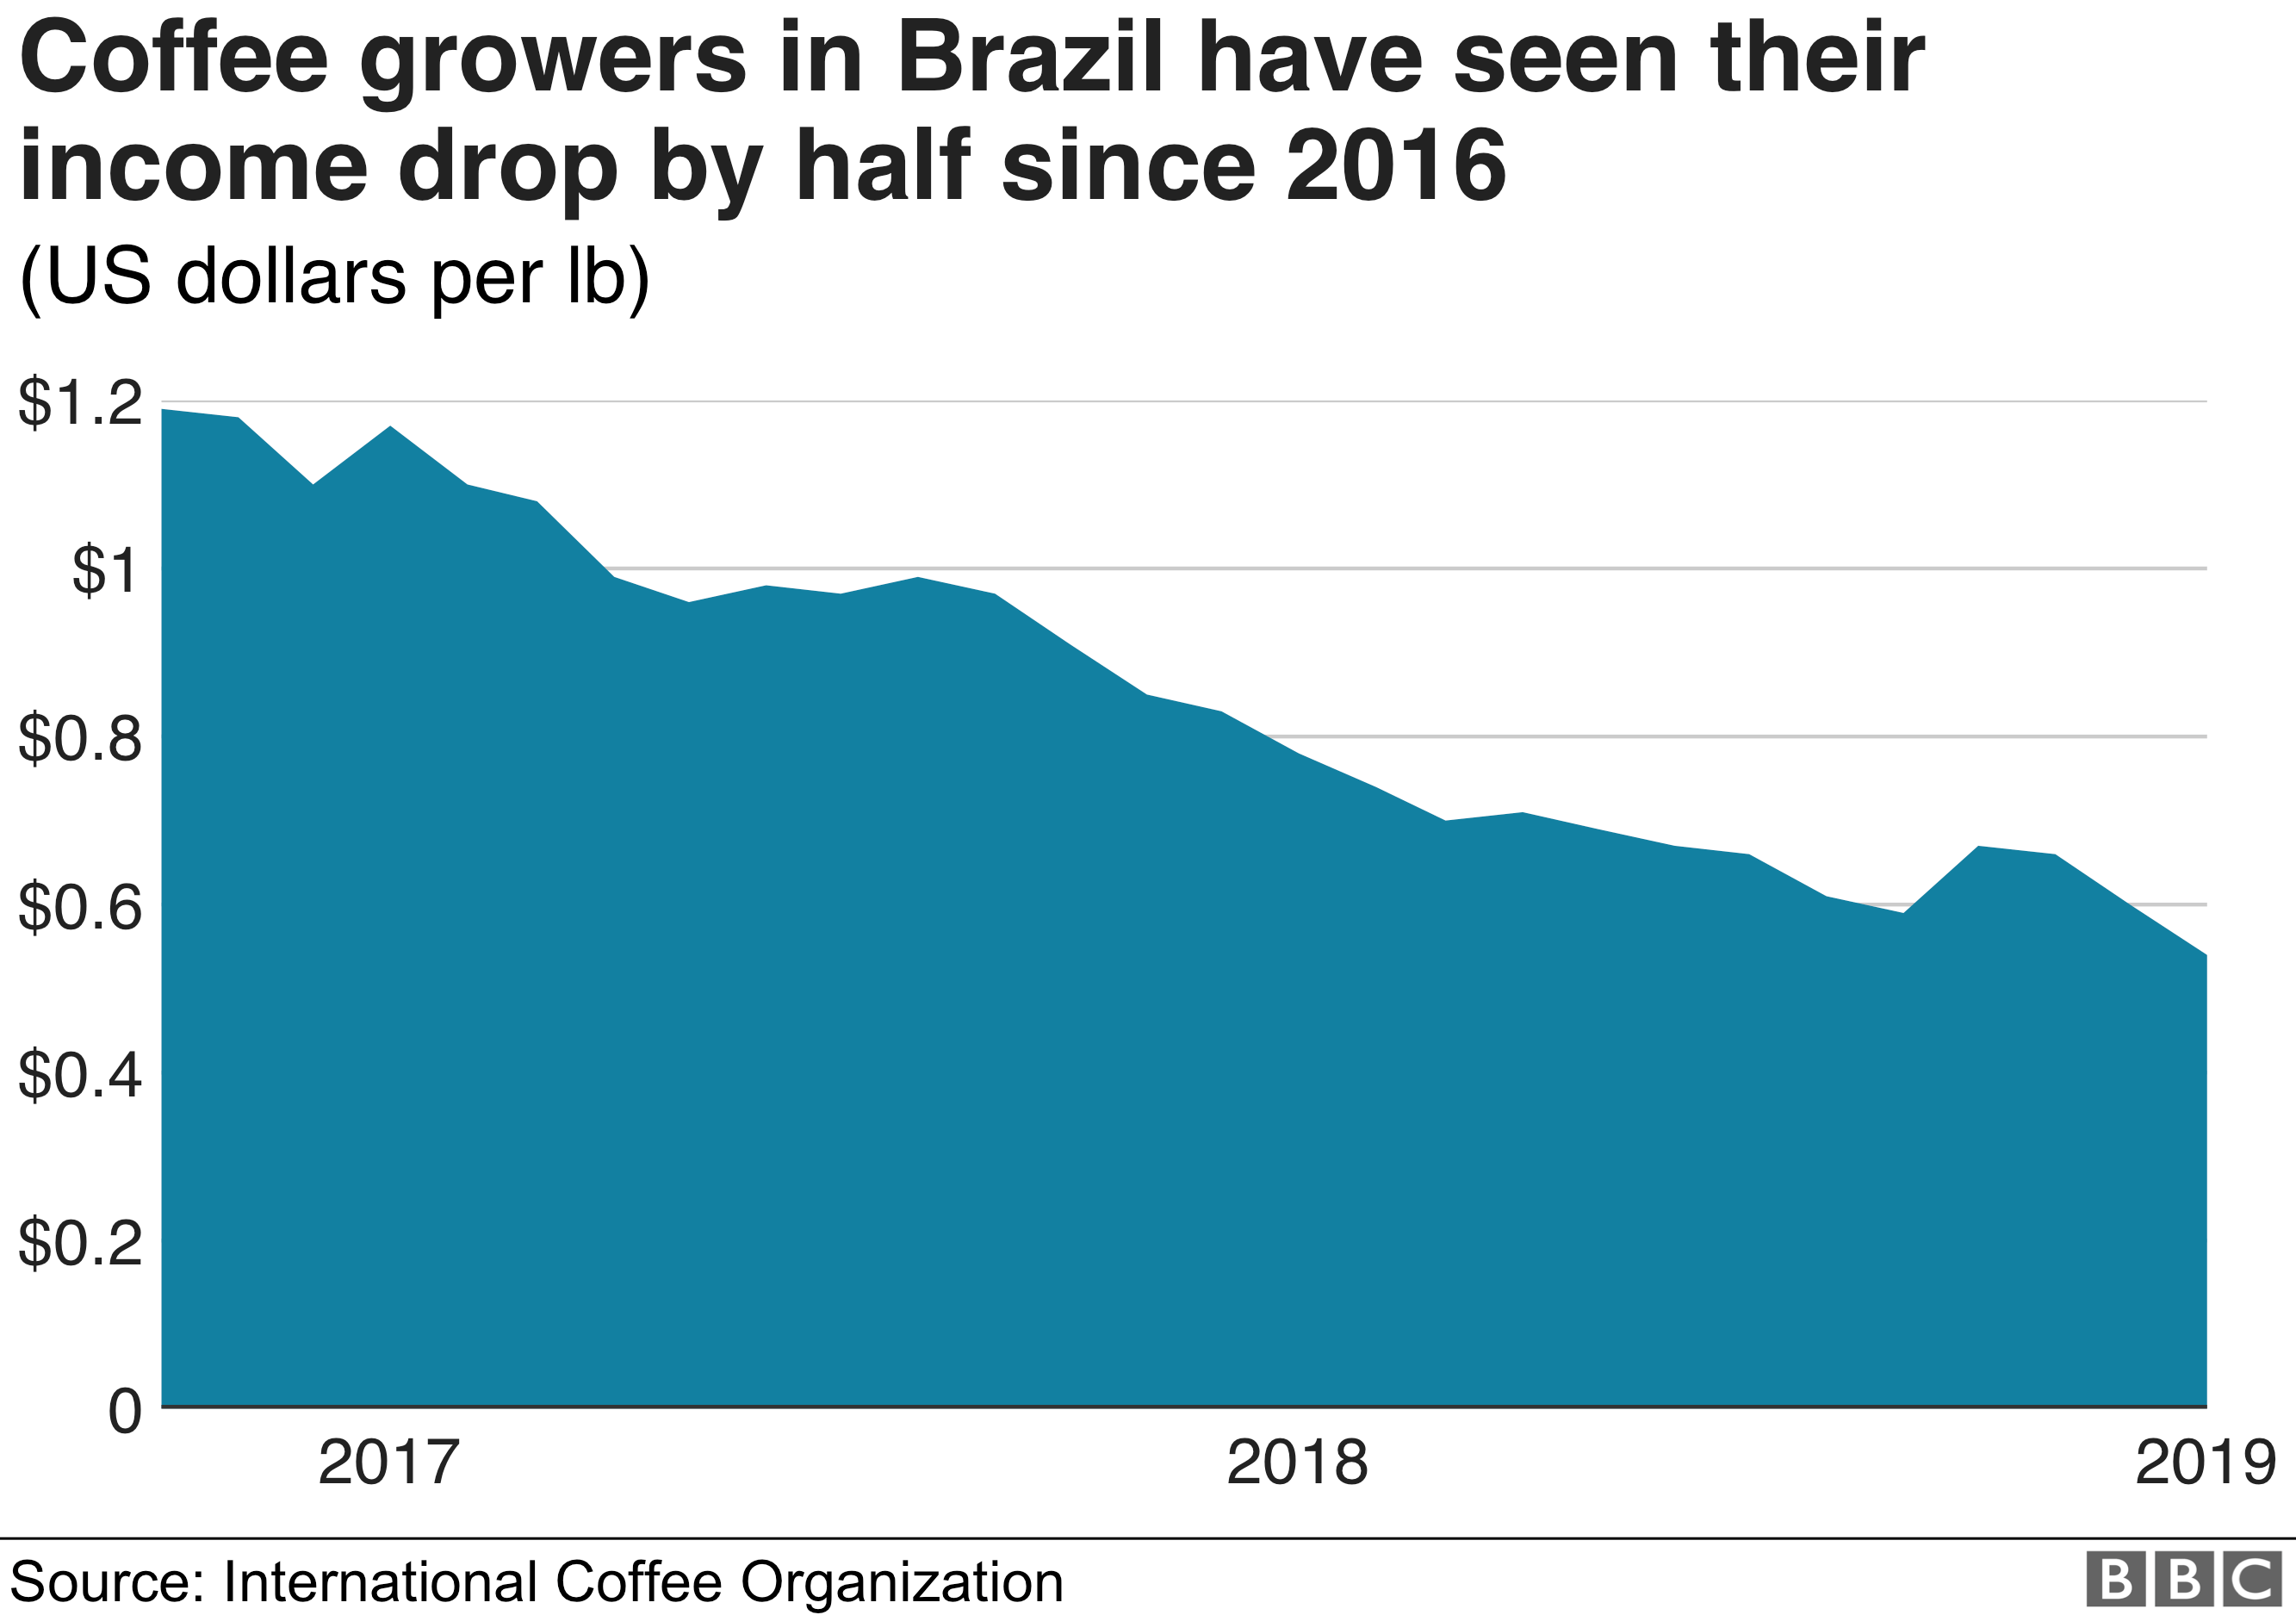 Coffee prices declining for producers from 2017 to the start of 2019